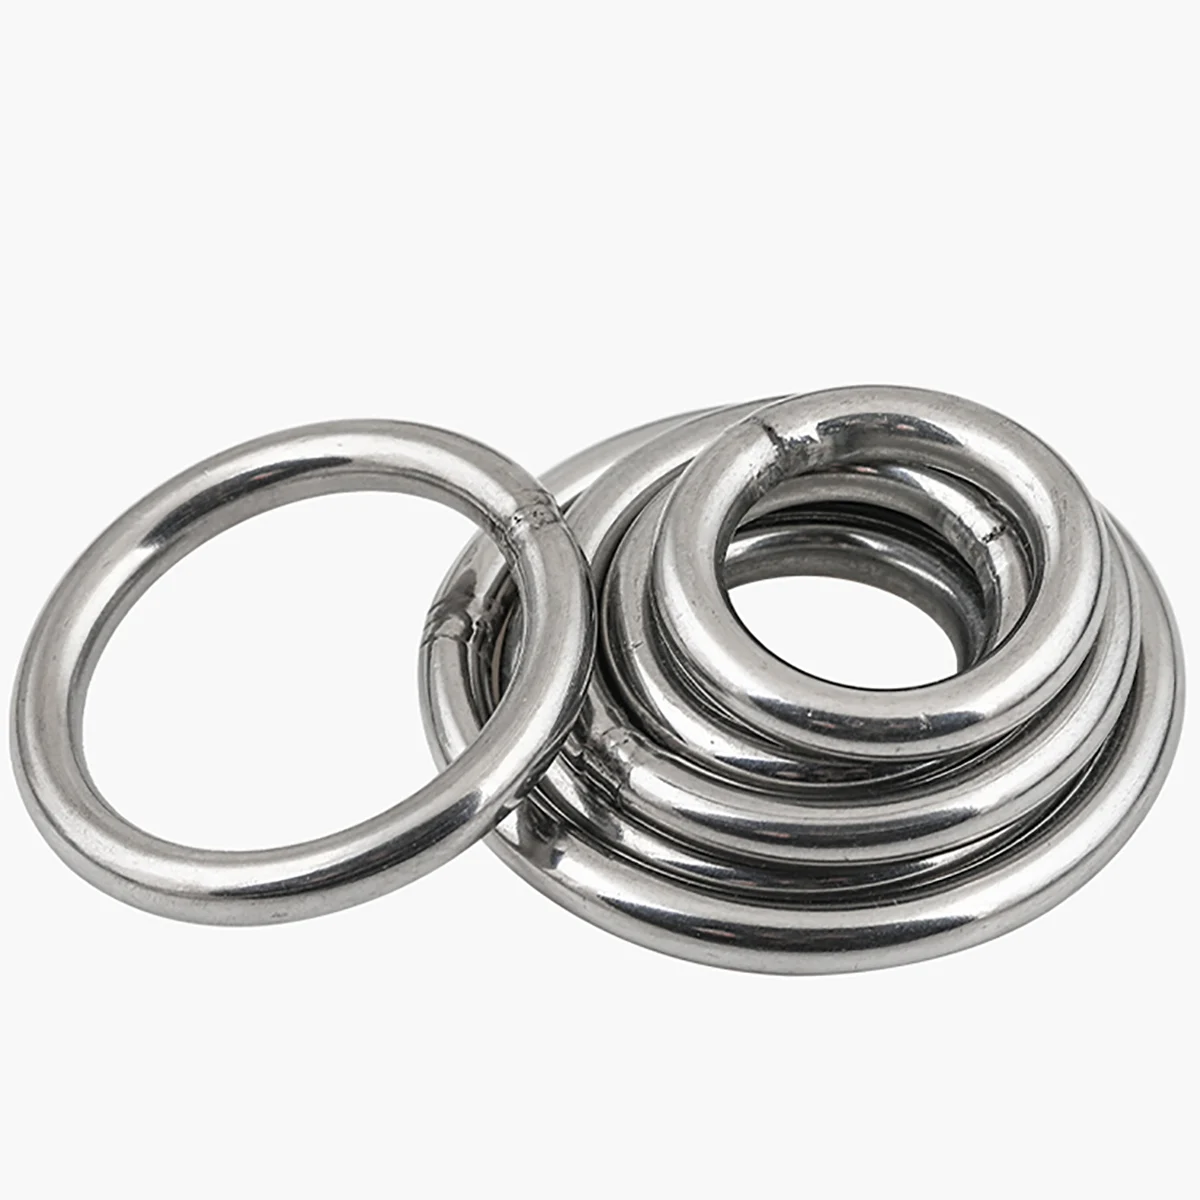 

304 Stainless Steel Heavy Duty Welded Round Rings M3 M4 M5 M6 M8 M10 Solid O Ring Rigging Marine Boat Hammock Yoga Hanging Ring